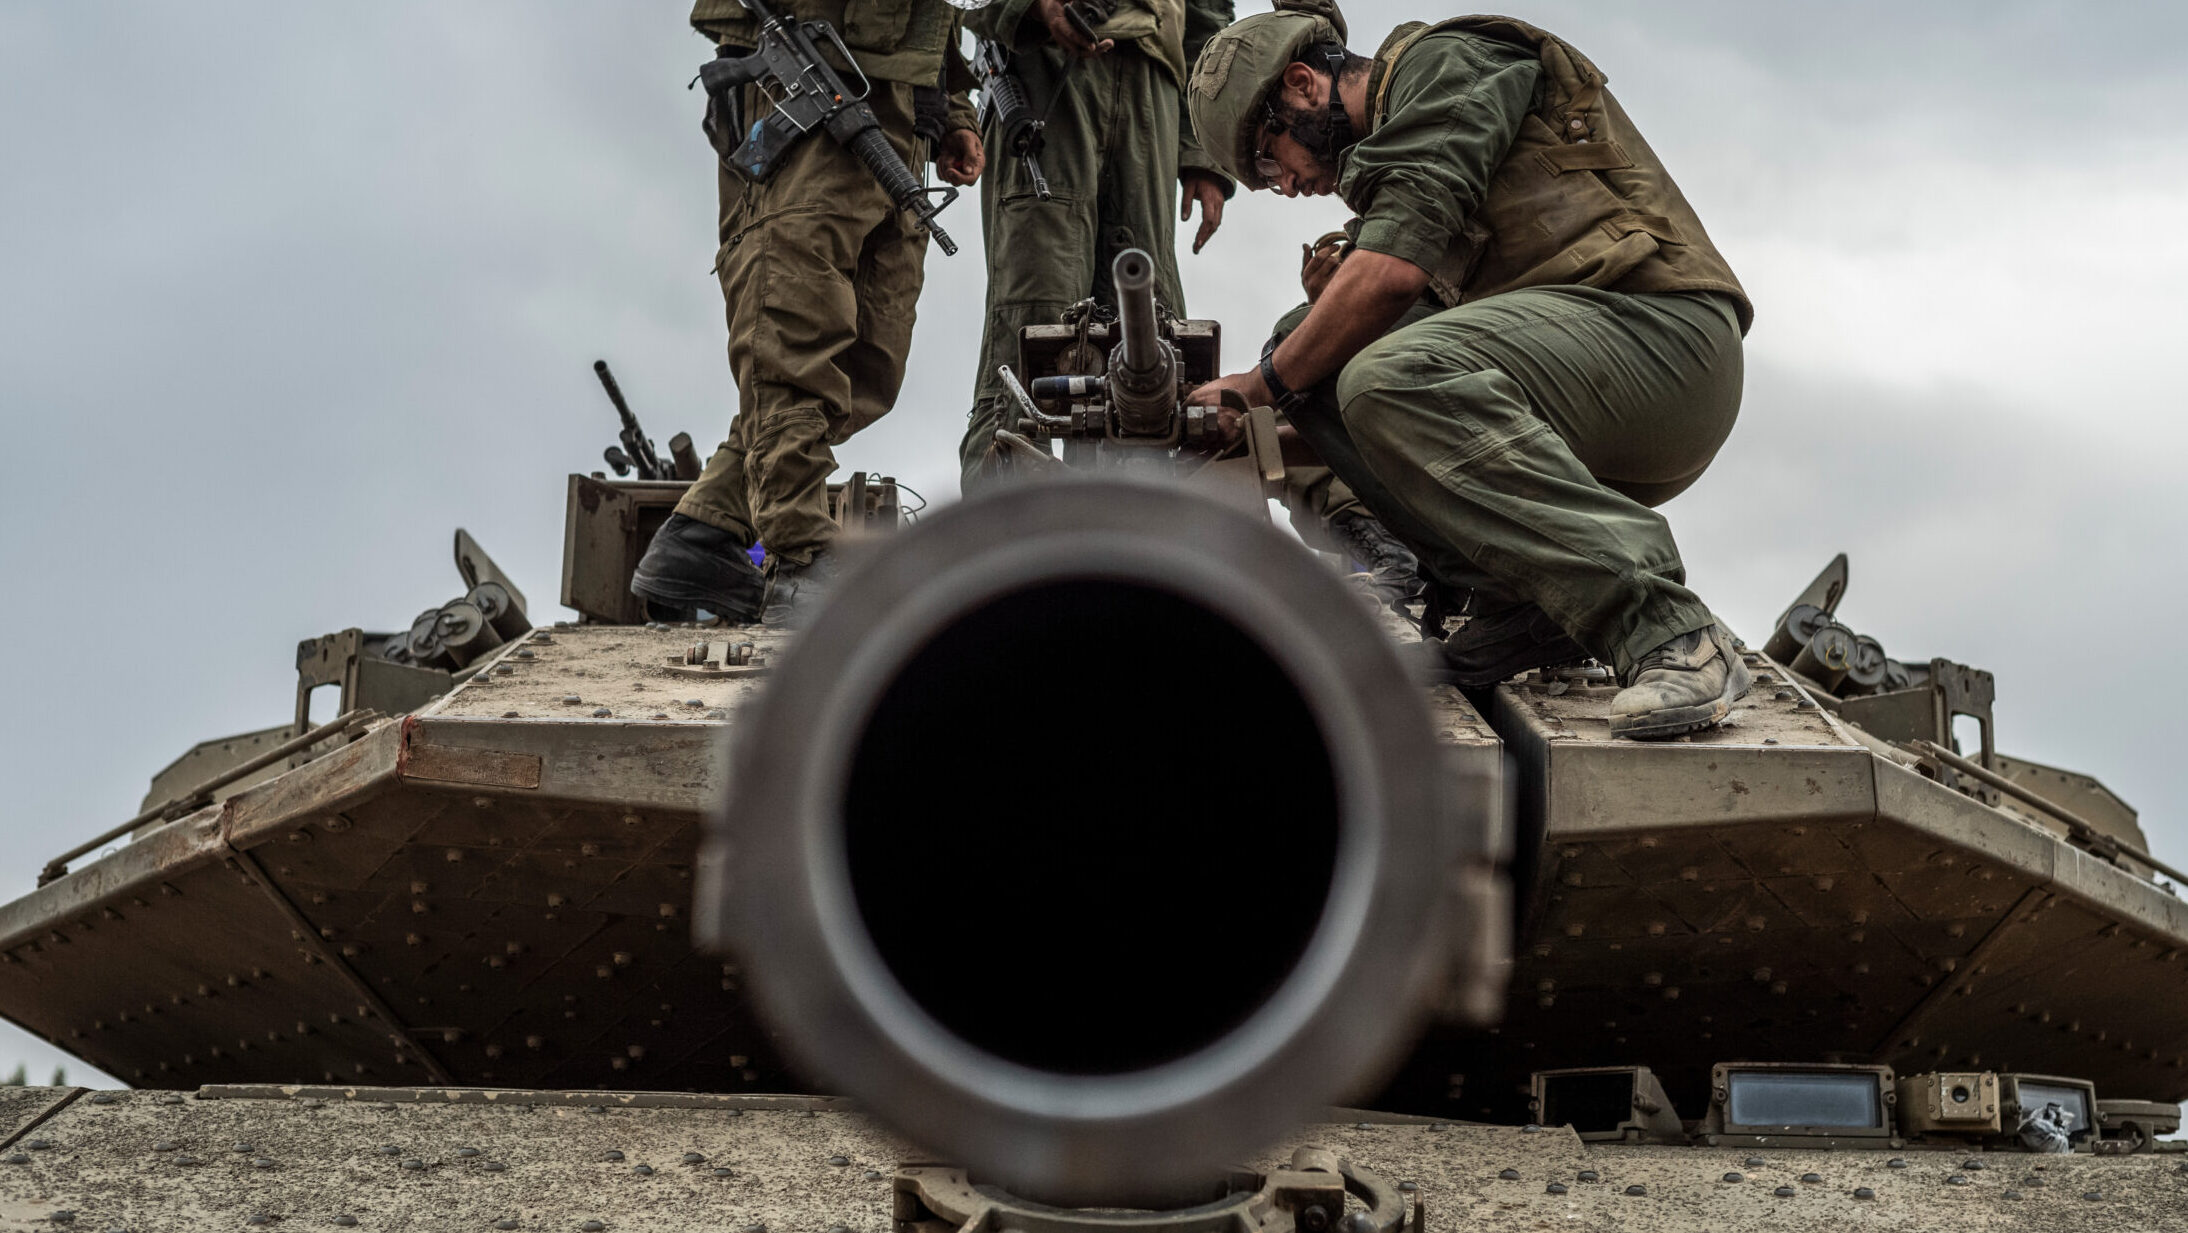 The Israeli Gaza campaign: High expectations, big risks and bleak outcomes